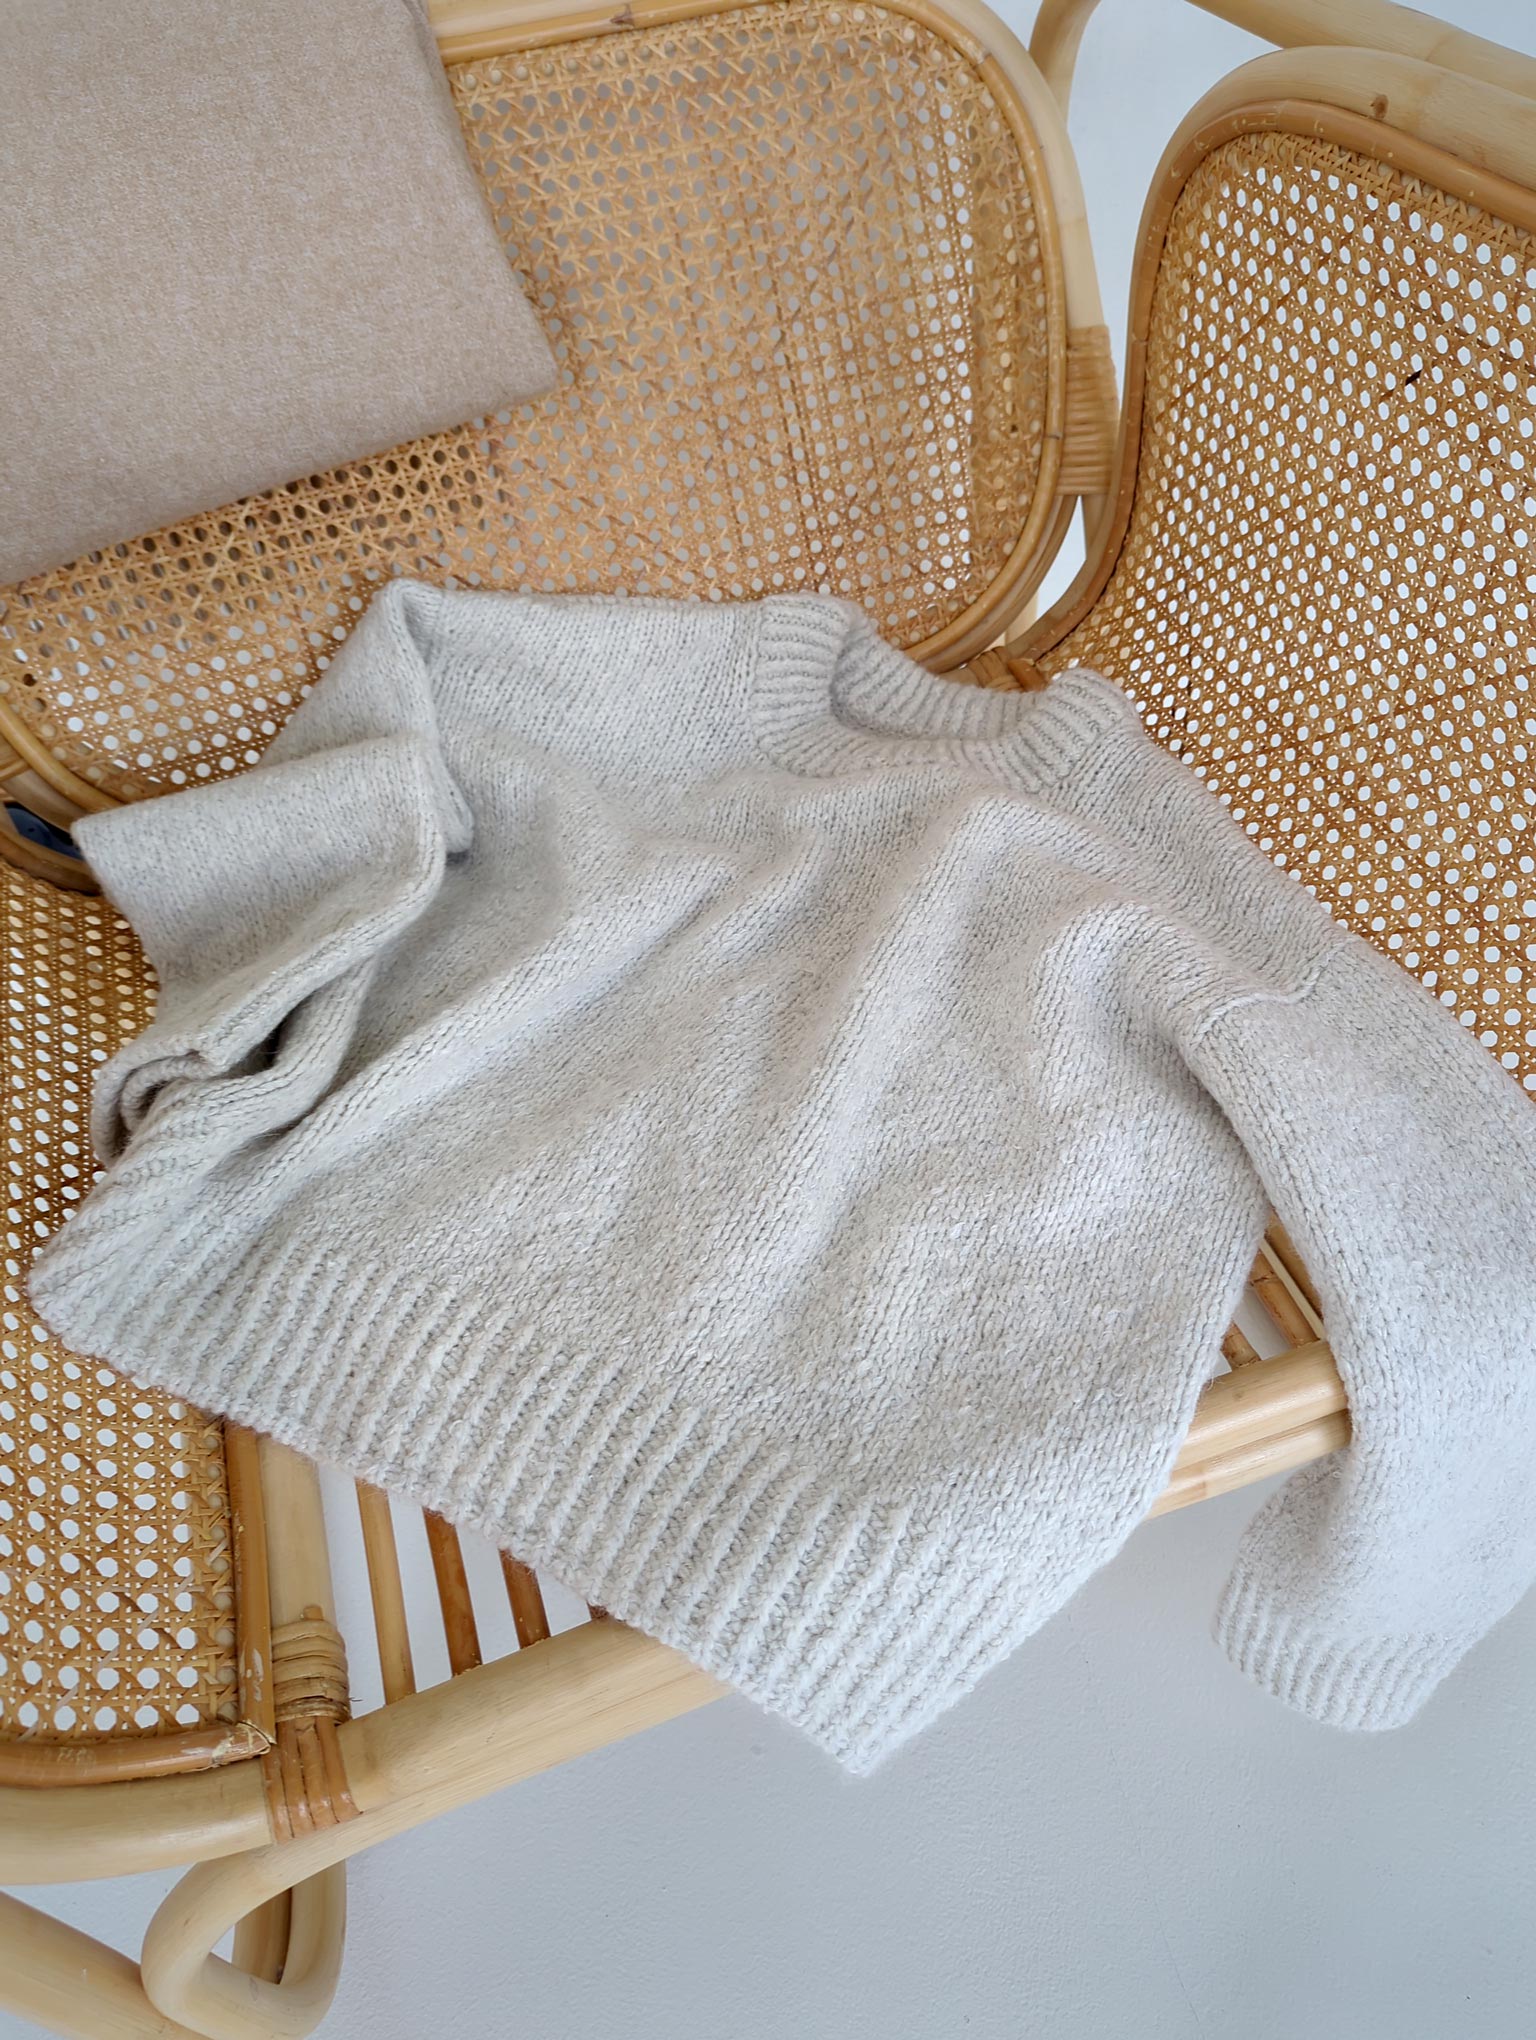 Knit a comfortable Penny Sweater using MorecaKnit's pattern with various knitting techniques